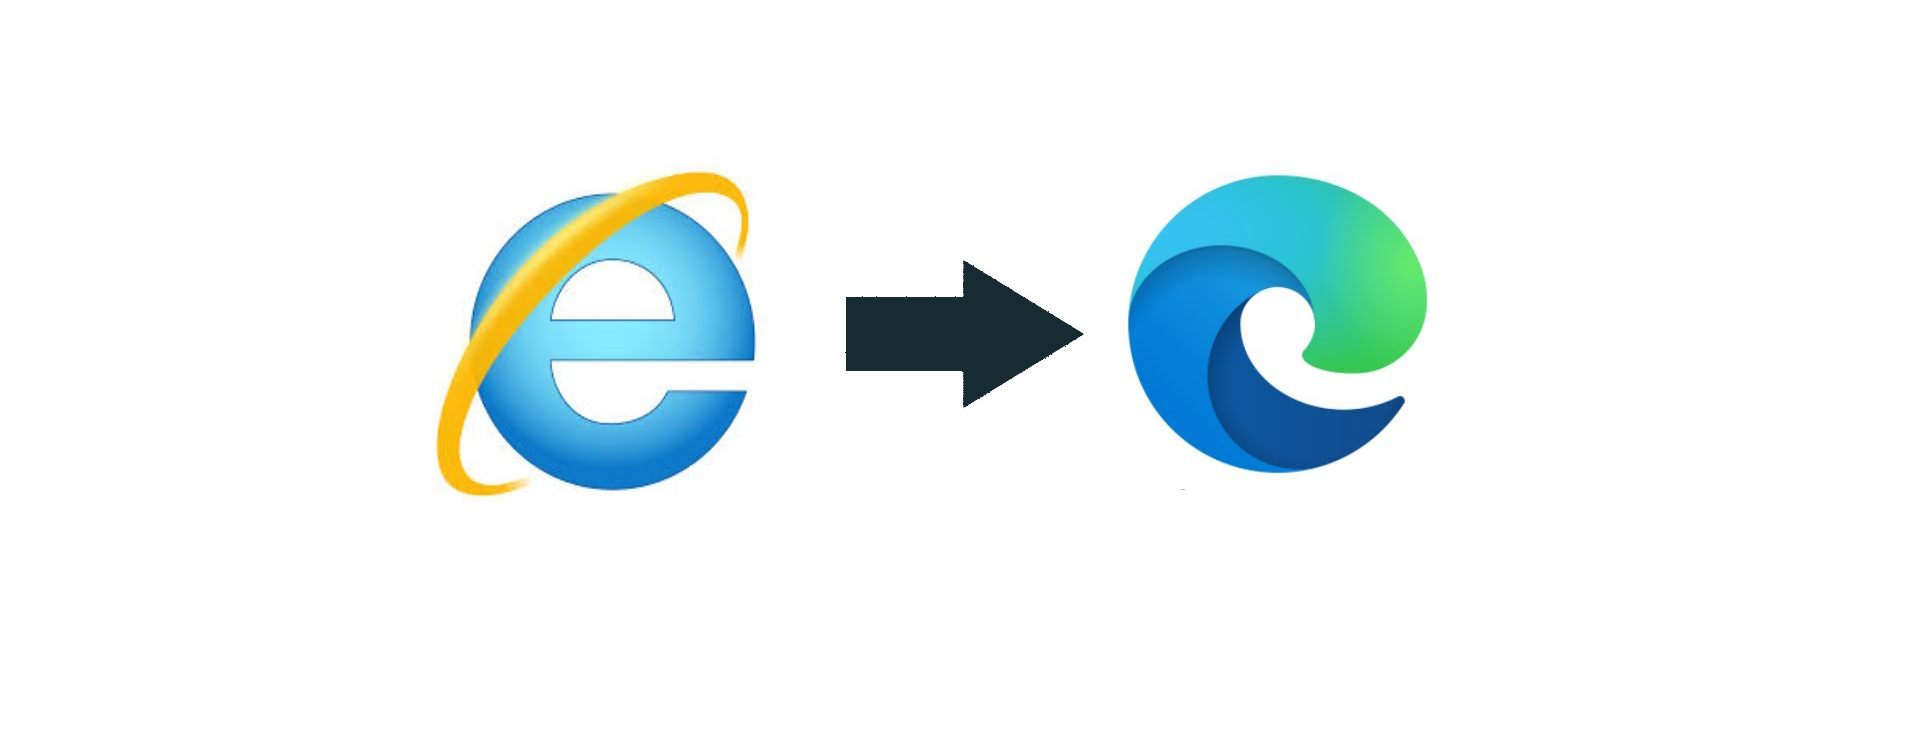 ie to edge